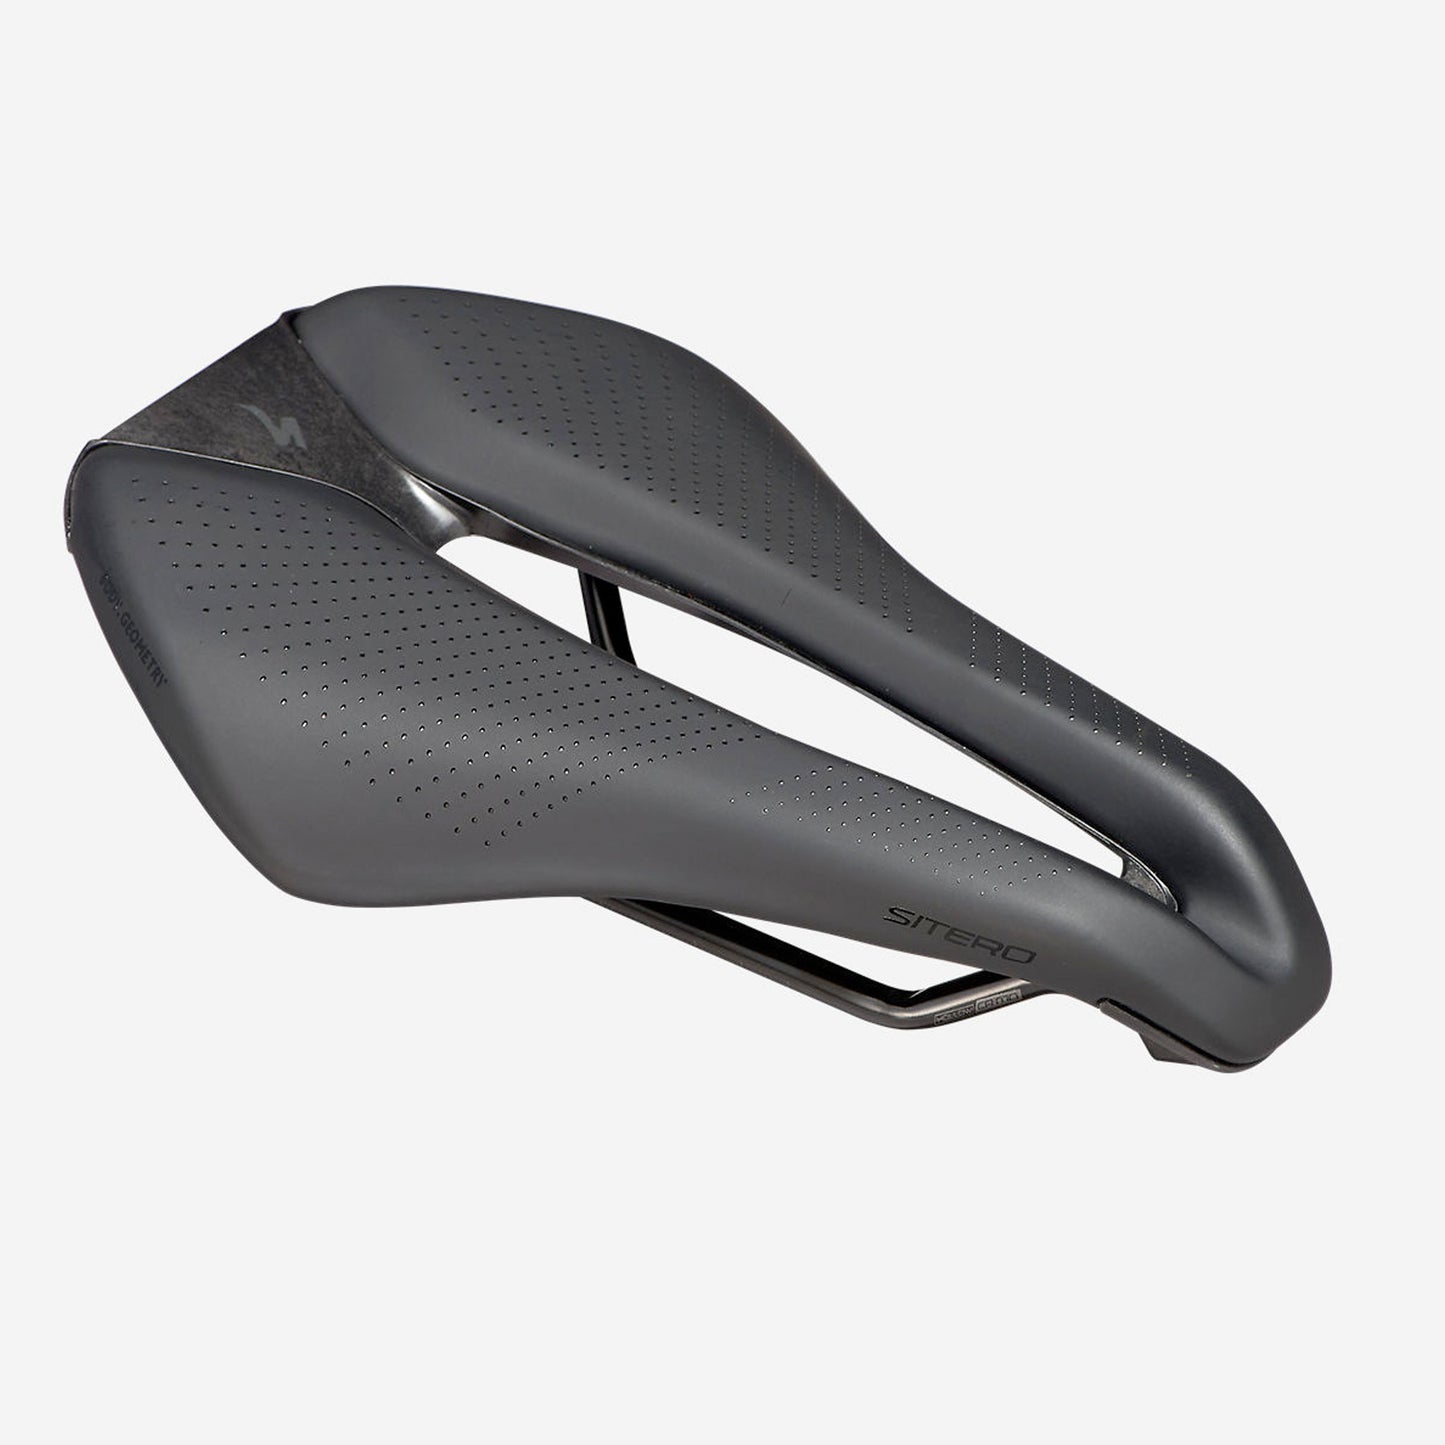 Specialized Sitero Road Saddle buy online at Woolys Wheels Sydney with free delivery